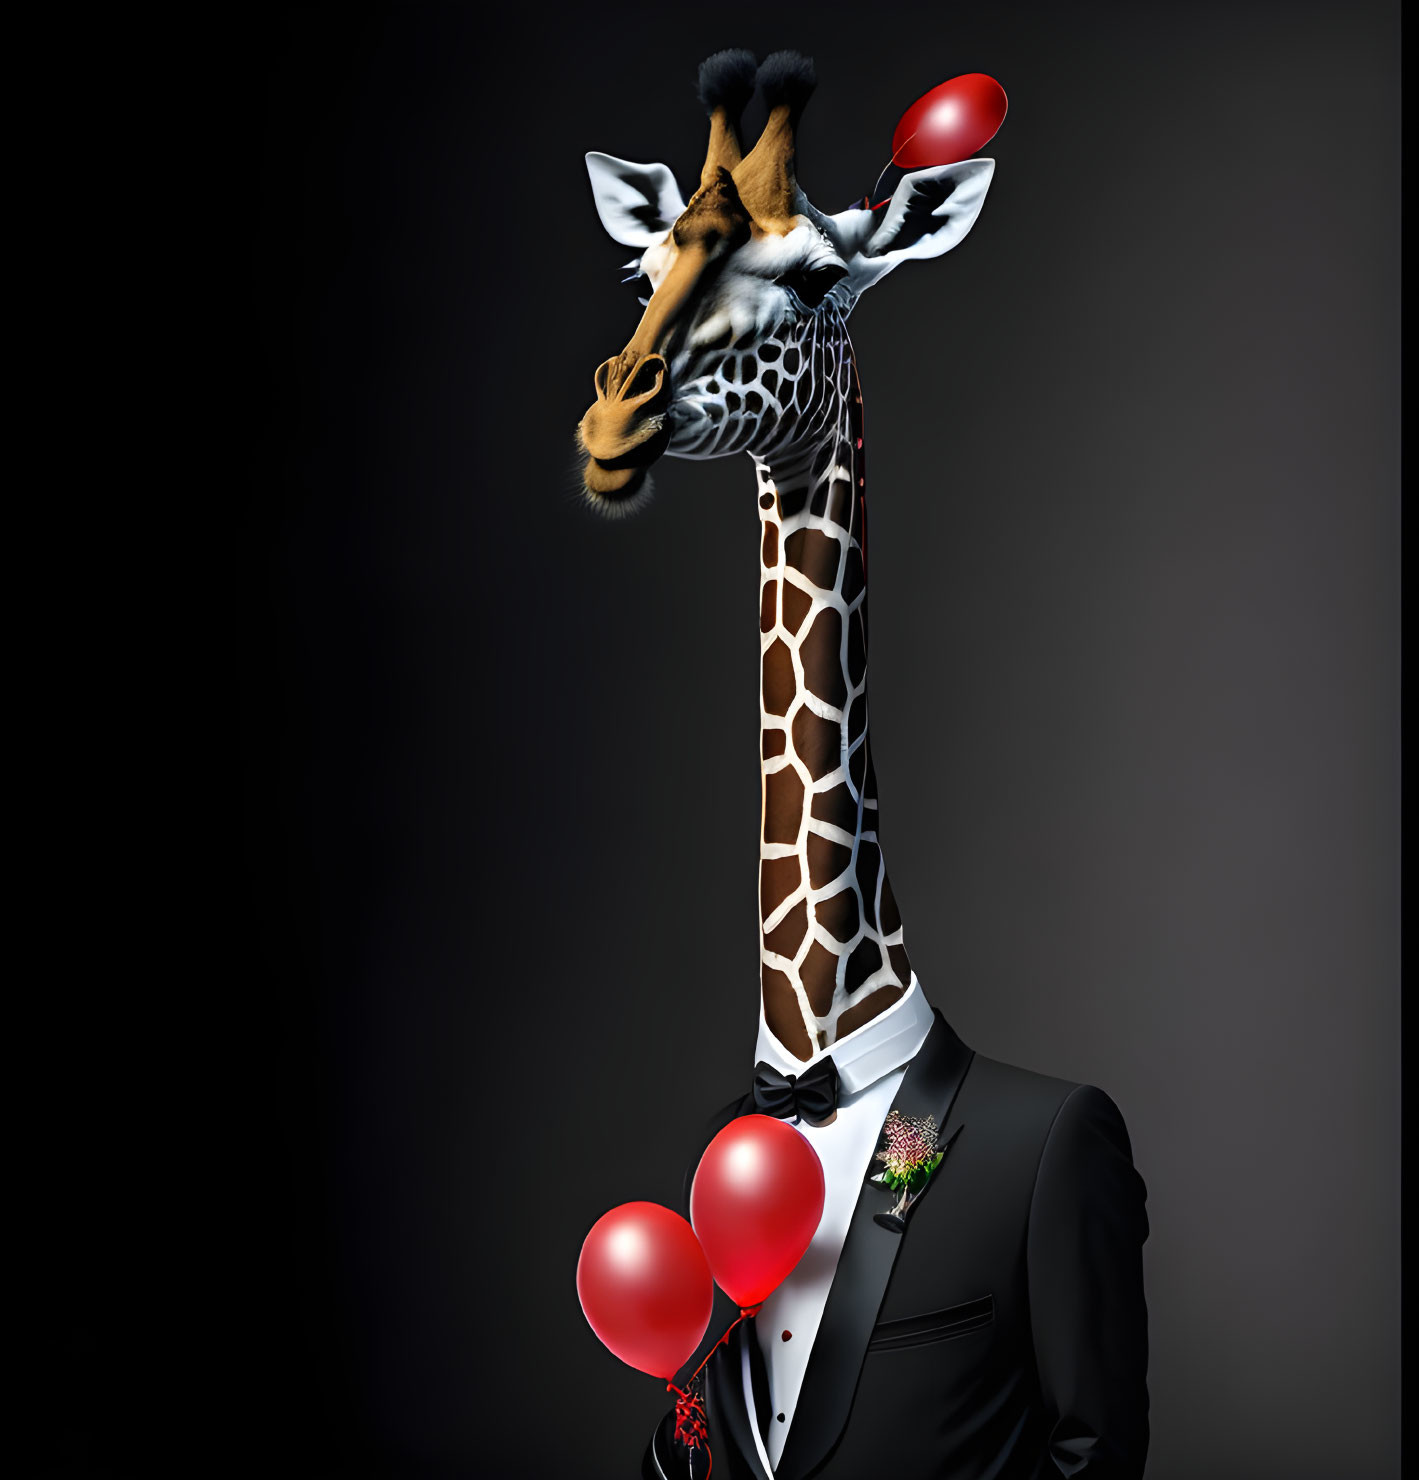 Surrealist image: Giraffe head on human body in tuxedo with red balloons